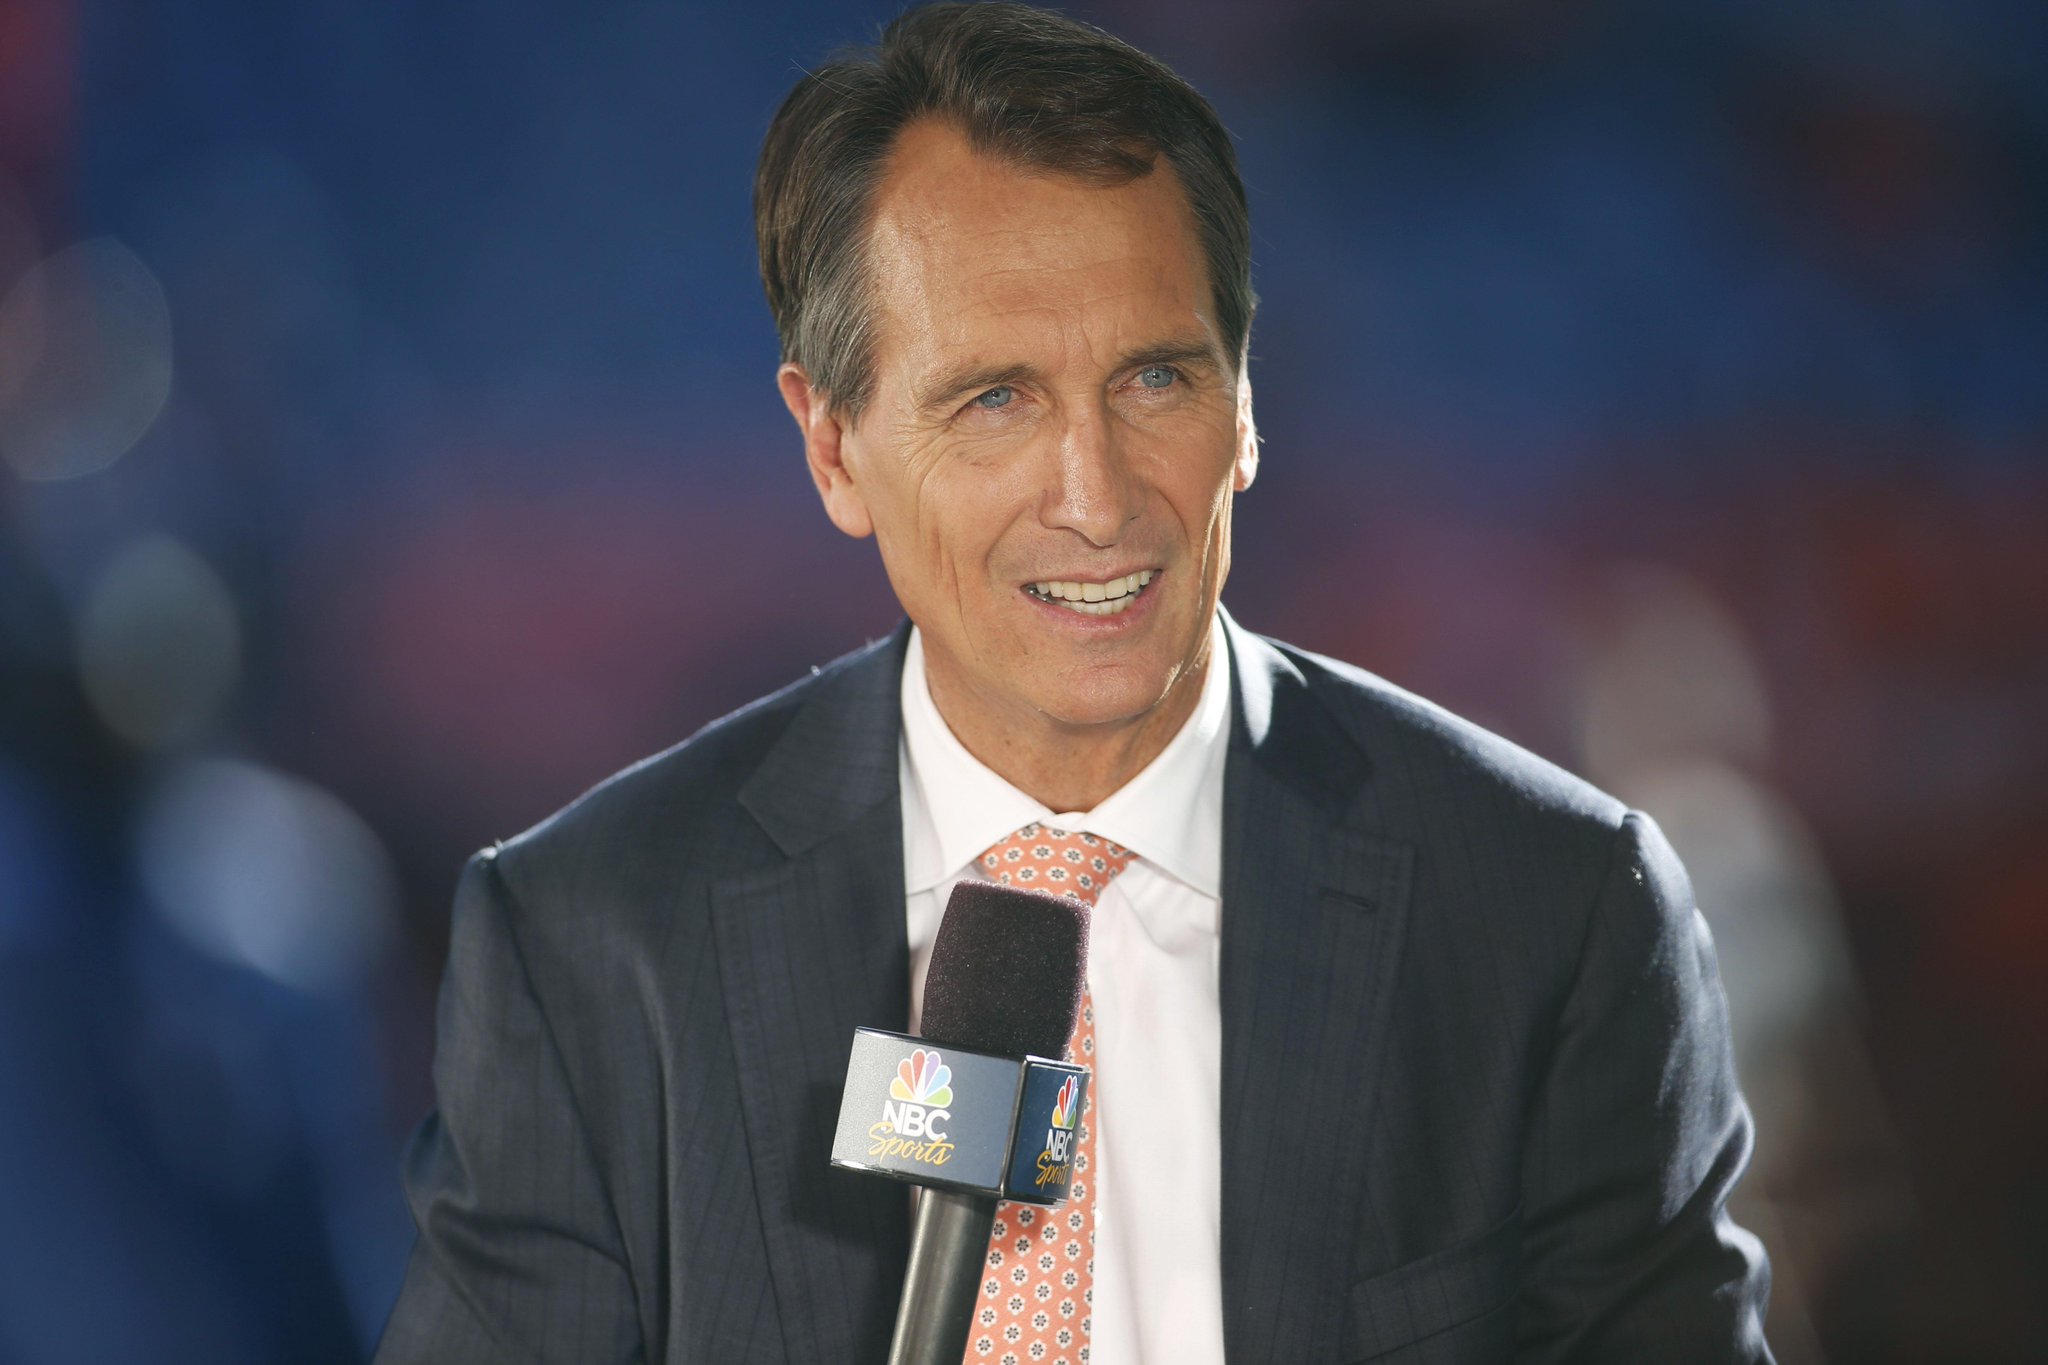 Happy 56th birthday to former receiver and Ft. Thomas resident Cris Collinsworth 